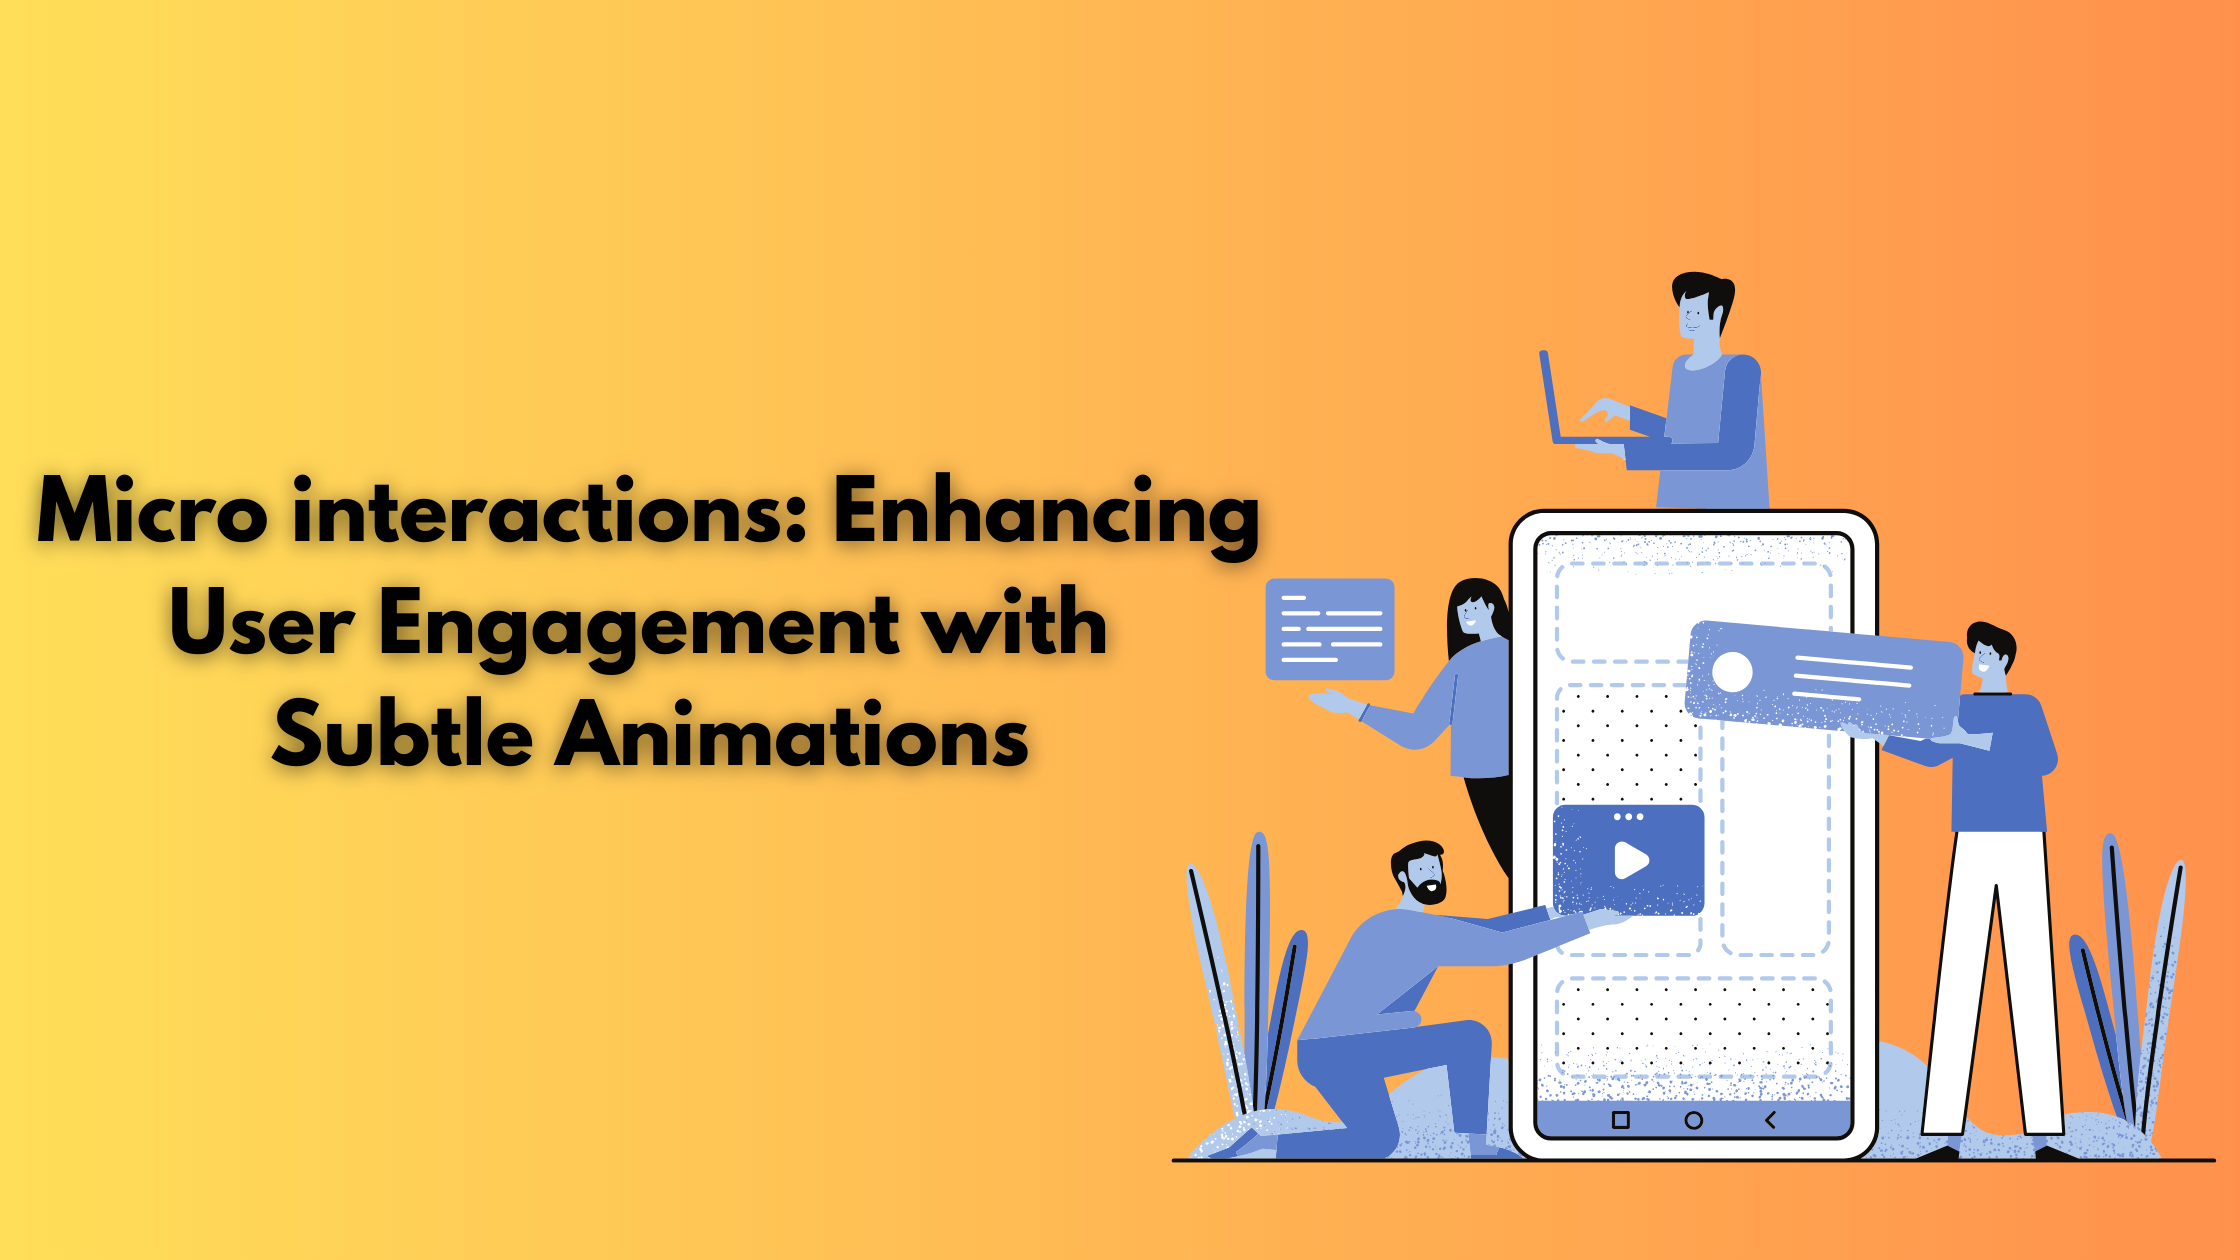 Micro interactions: Enhancing User Engagement with Subtle Animations